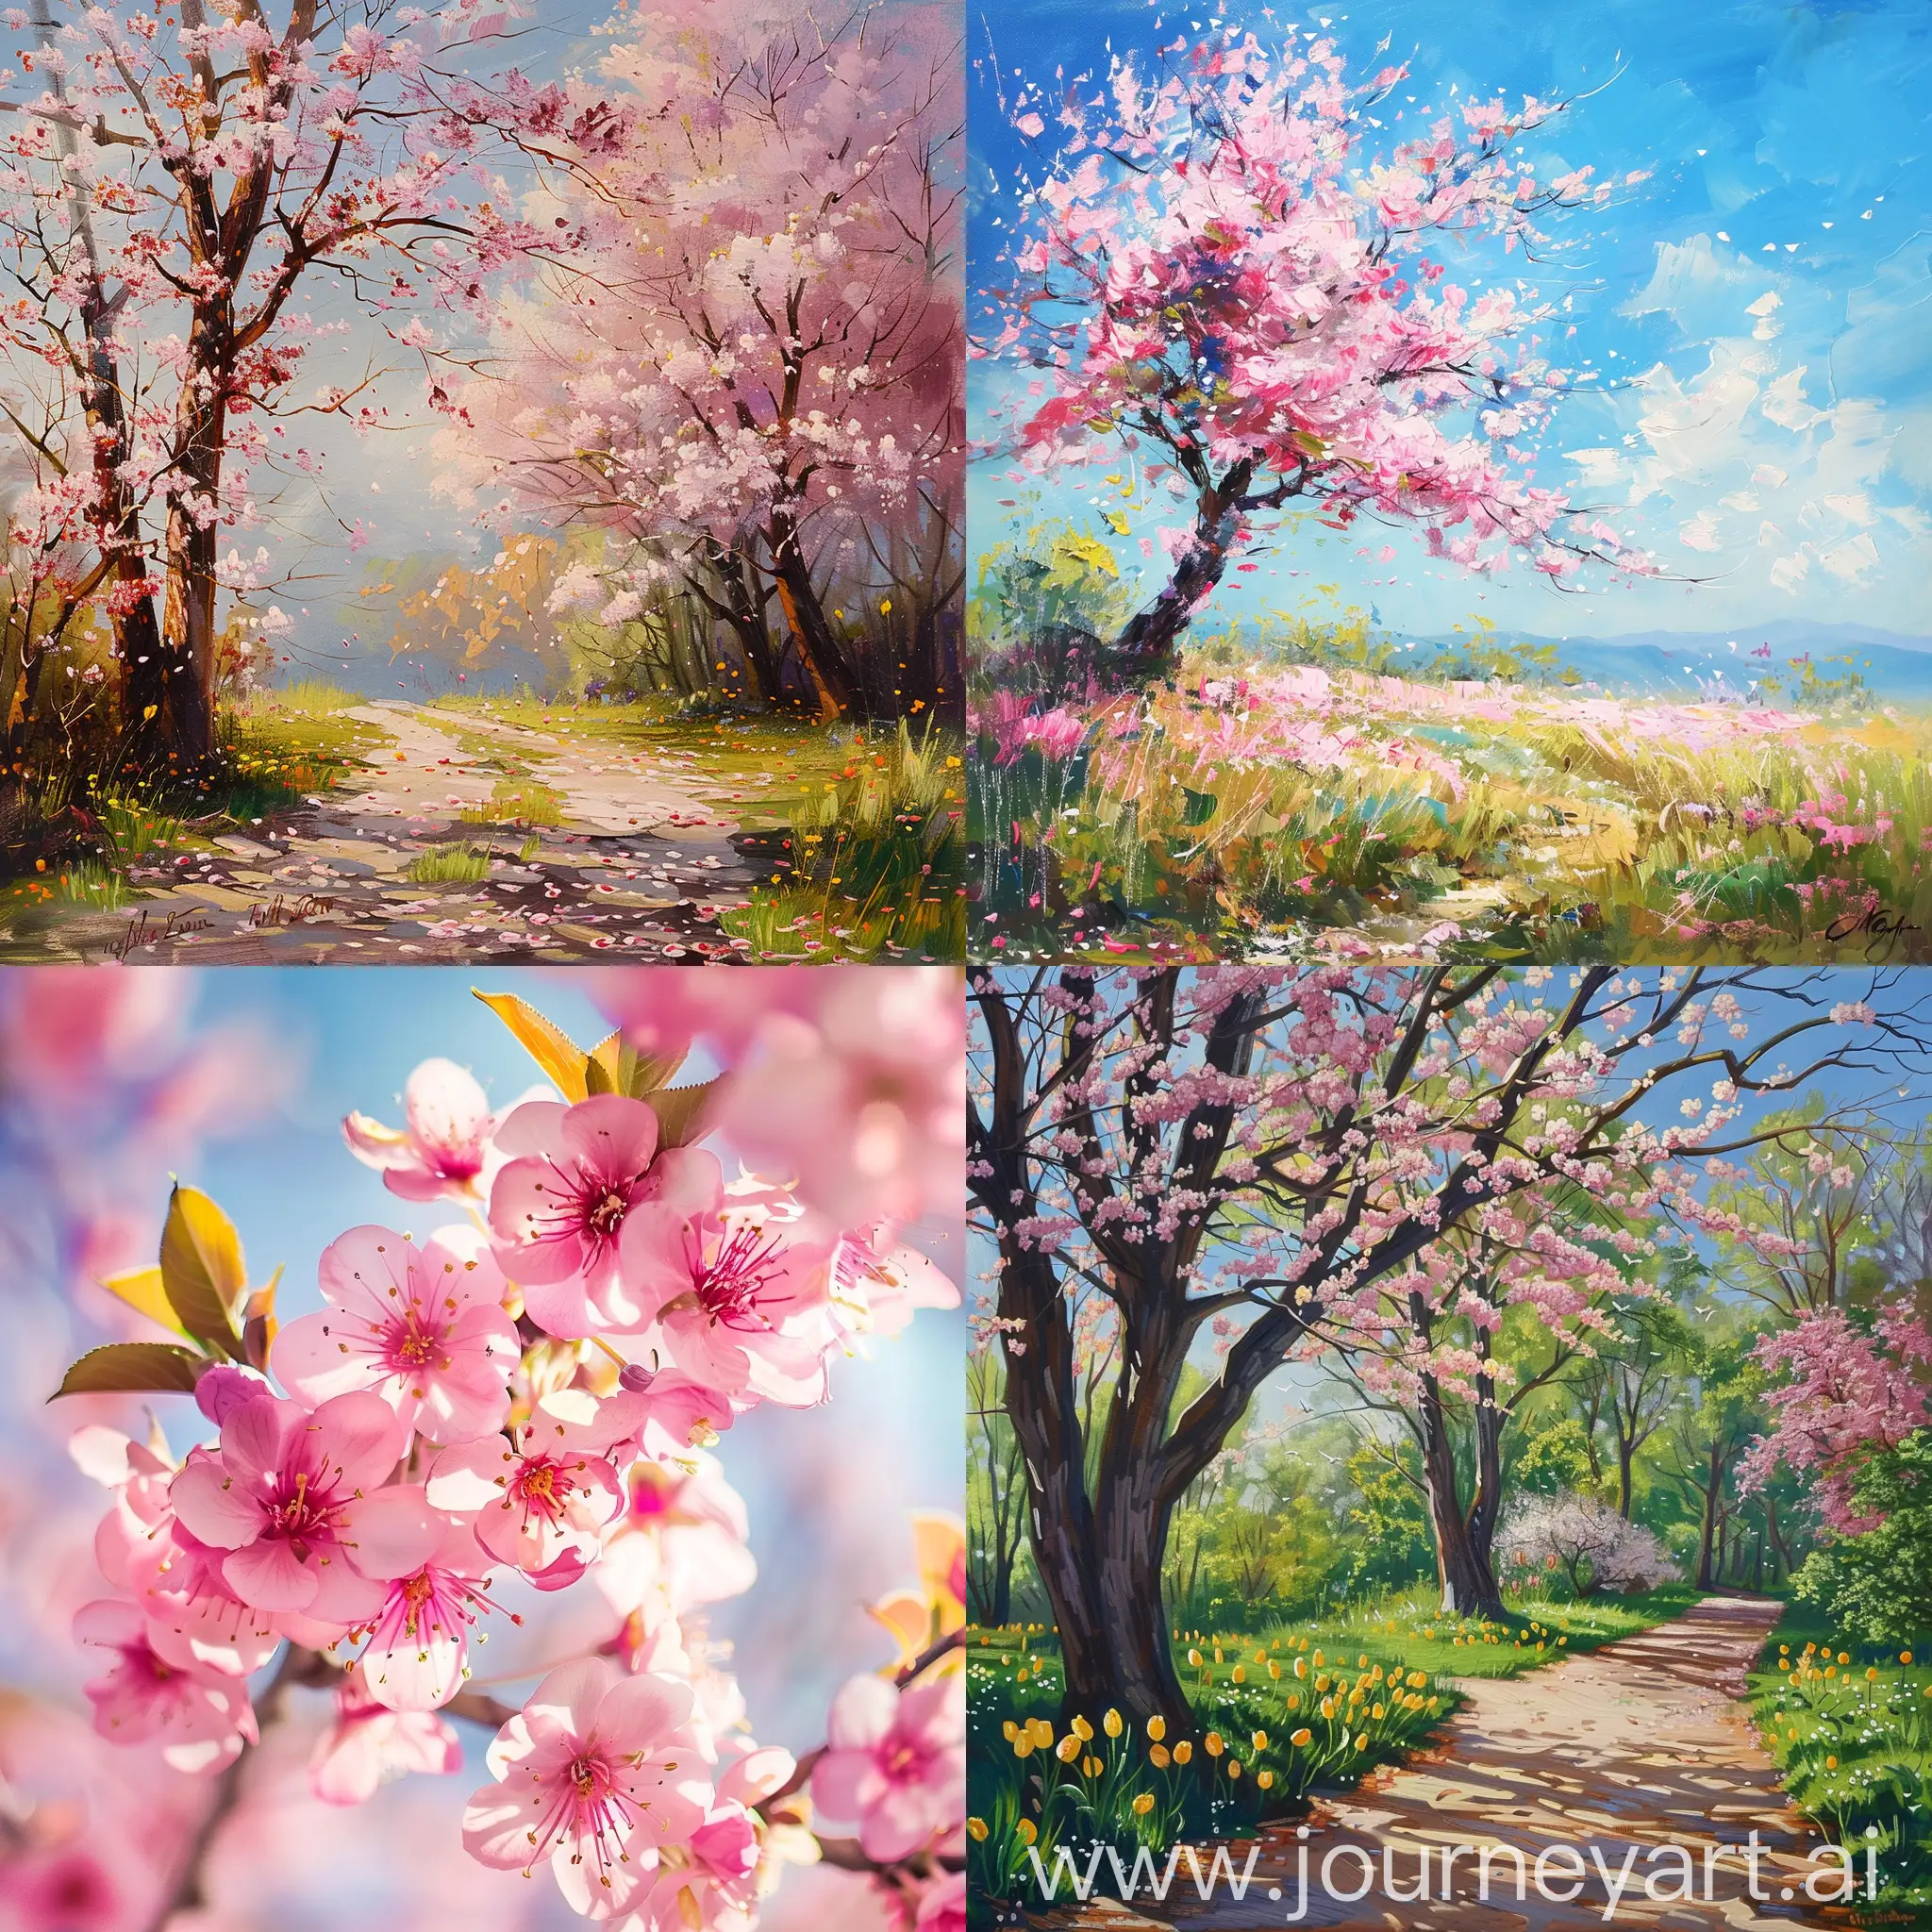 Vibrant-Spring-Blossoms-in-a-Serene-Setting